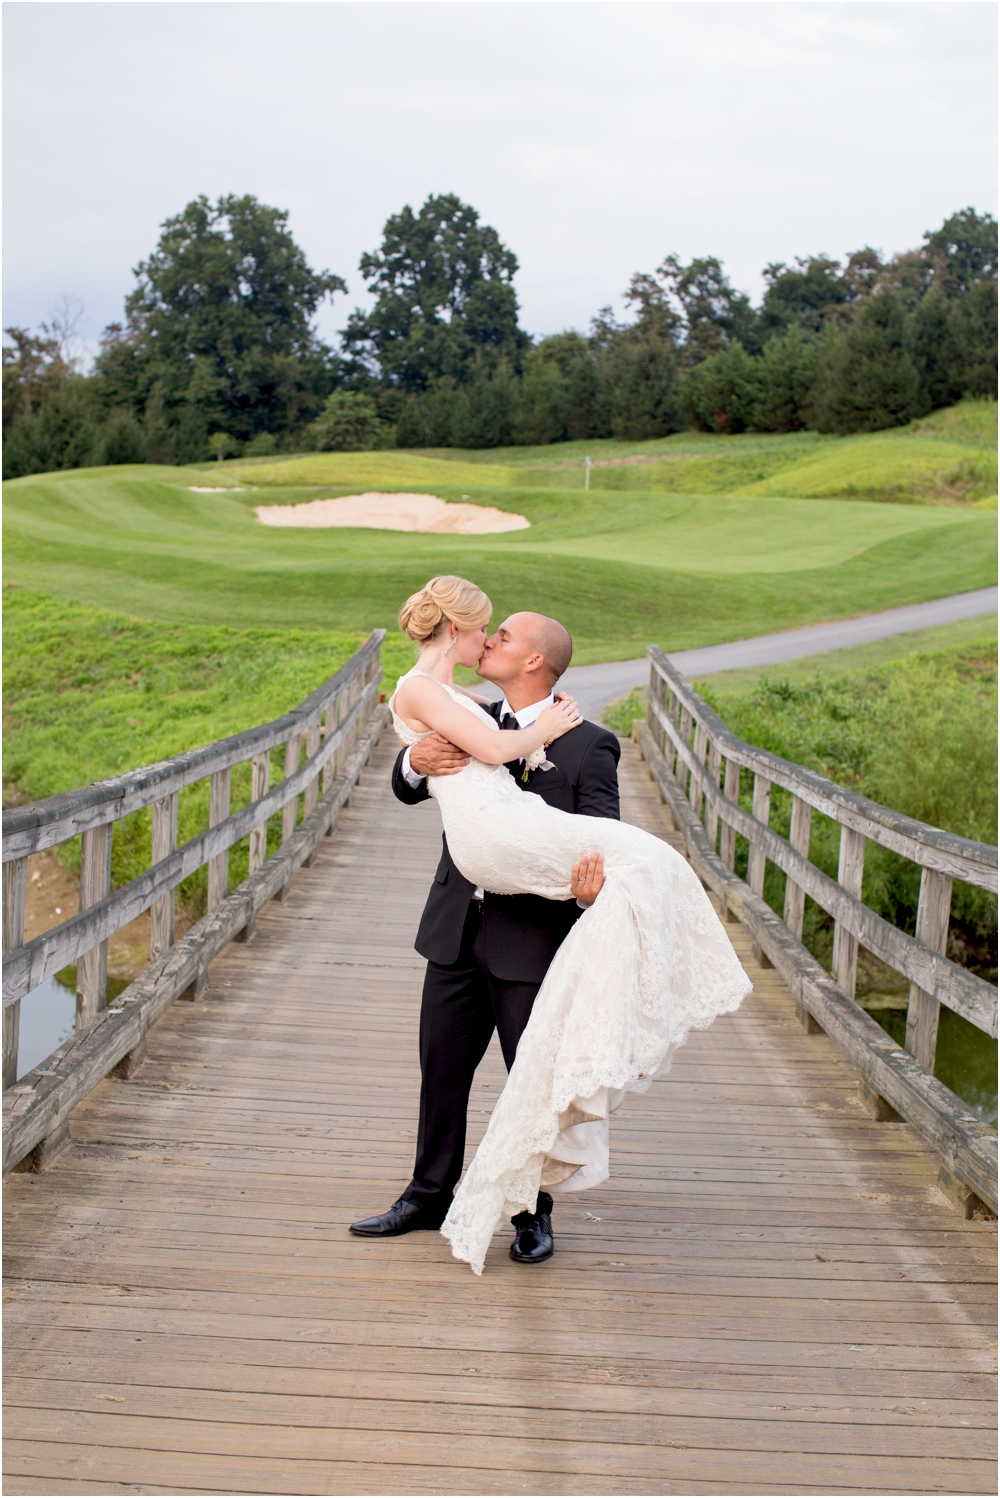 Musket Ridge Golf Course Wedding | Blush & Lavender Ombre Inspired Wedding | Country Club Wedding | Living Radiant Photography